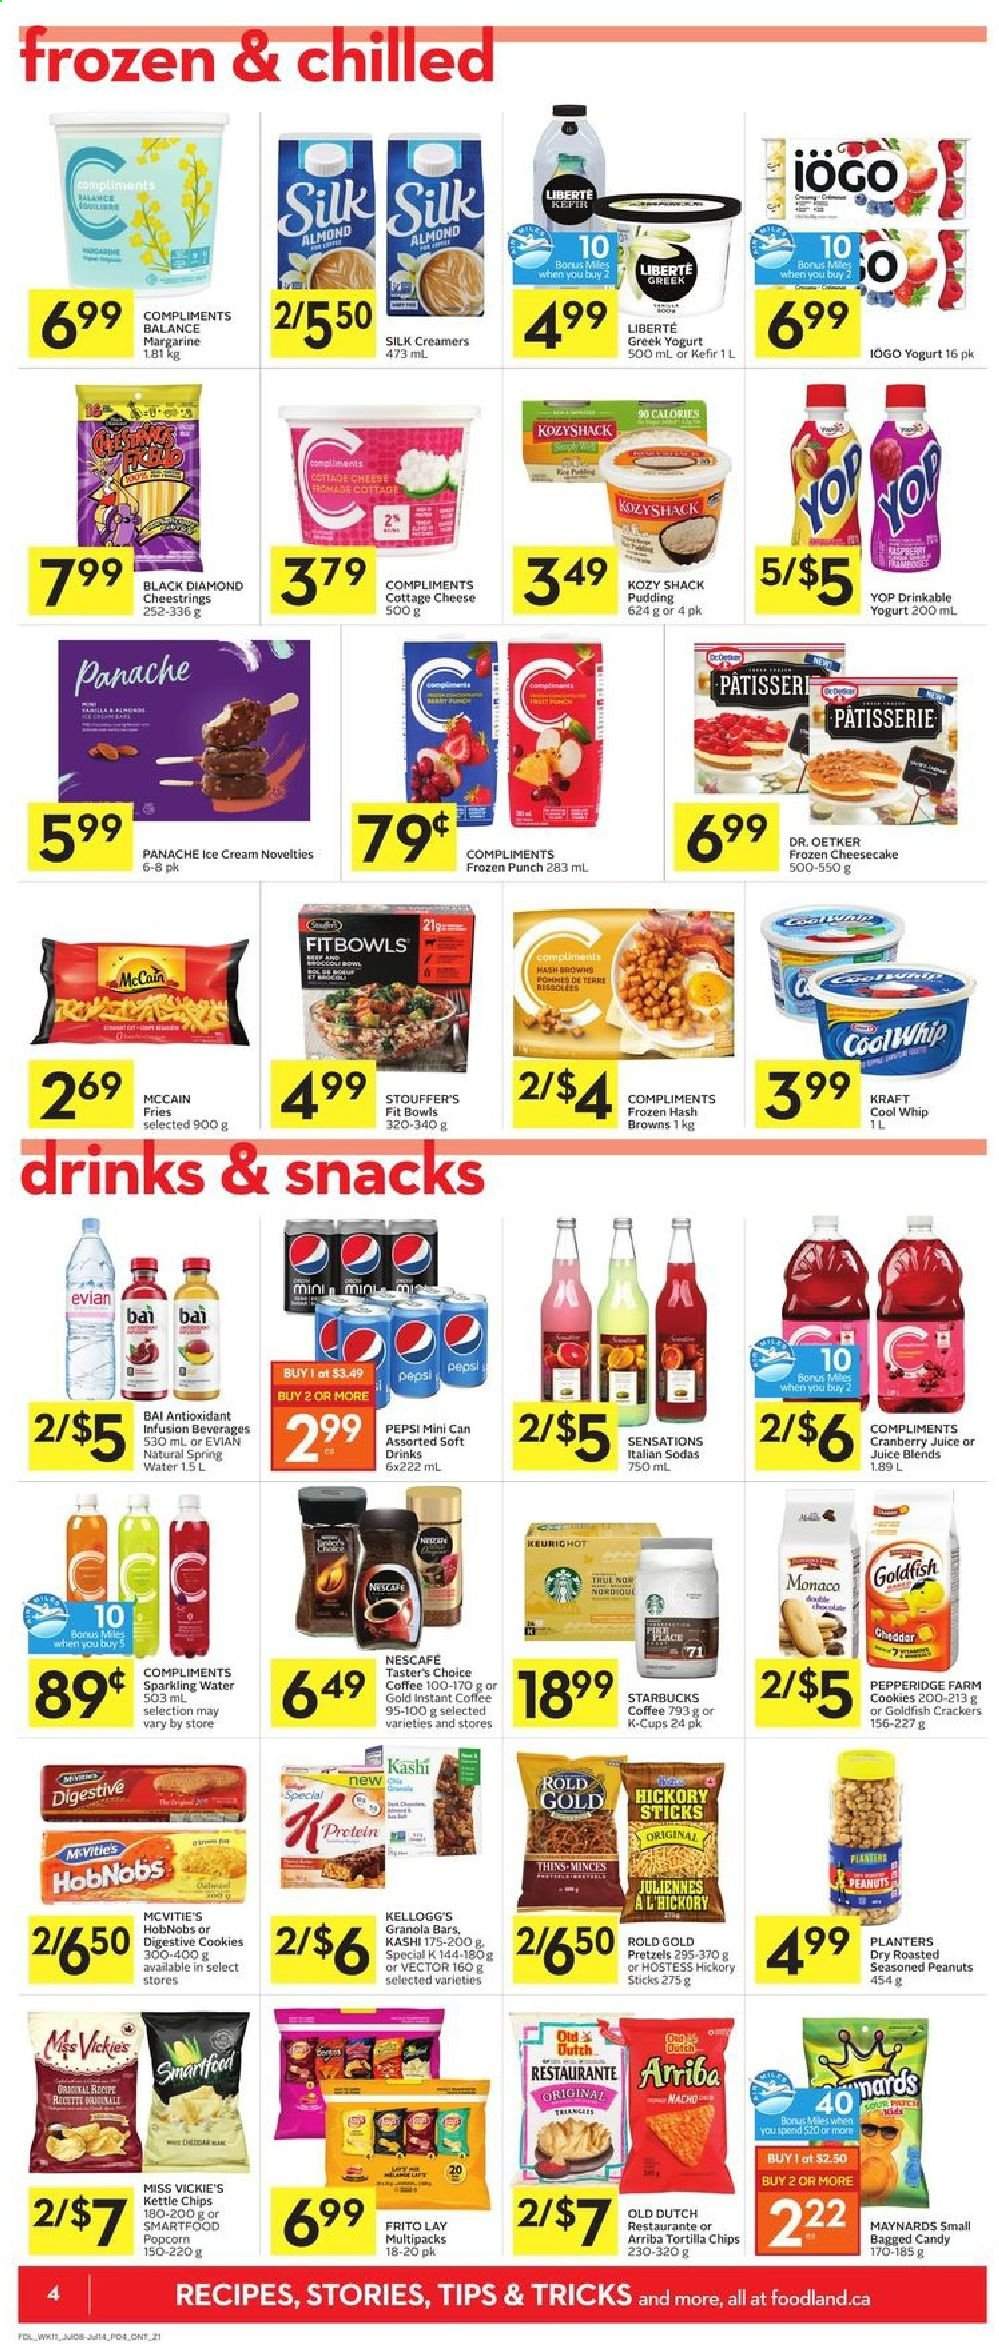 thumbnail - Foodland Flyer - July 08, 2021 - July 14, 2021 - Sales products - pretzels, Kraft®, cottage cheese, string cheese, cheese, Dr. Oetker, greek yoghurt, pudding, yoghurt, Silk, kefir, margarine, Cool Whip, ice cream, Stouffer's, McCain, hash browns, potato fries, cookies, crackers, Kellogg's, Digestive, tortilla chips, Smartfood, Thins, popcorn, Goldfish, granola bar, peanuts, Planters, cranberry juice, Pepsi, juice, soft drink, Bai, spring water, sparkling water, Evian, coffee, coffee capsules, Starbucks, K-Cups, punch, Nescafé. Page 4.